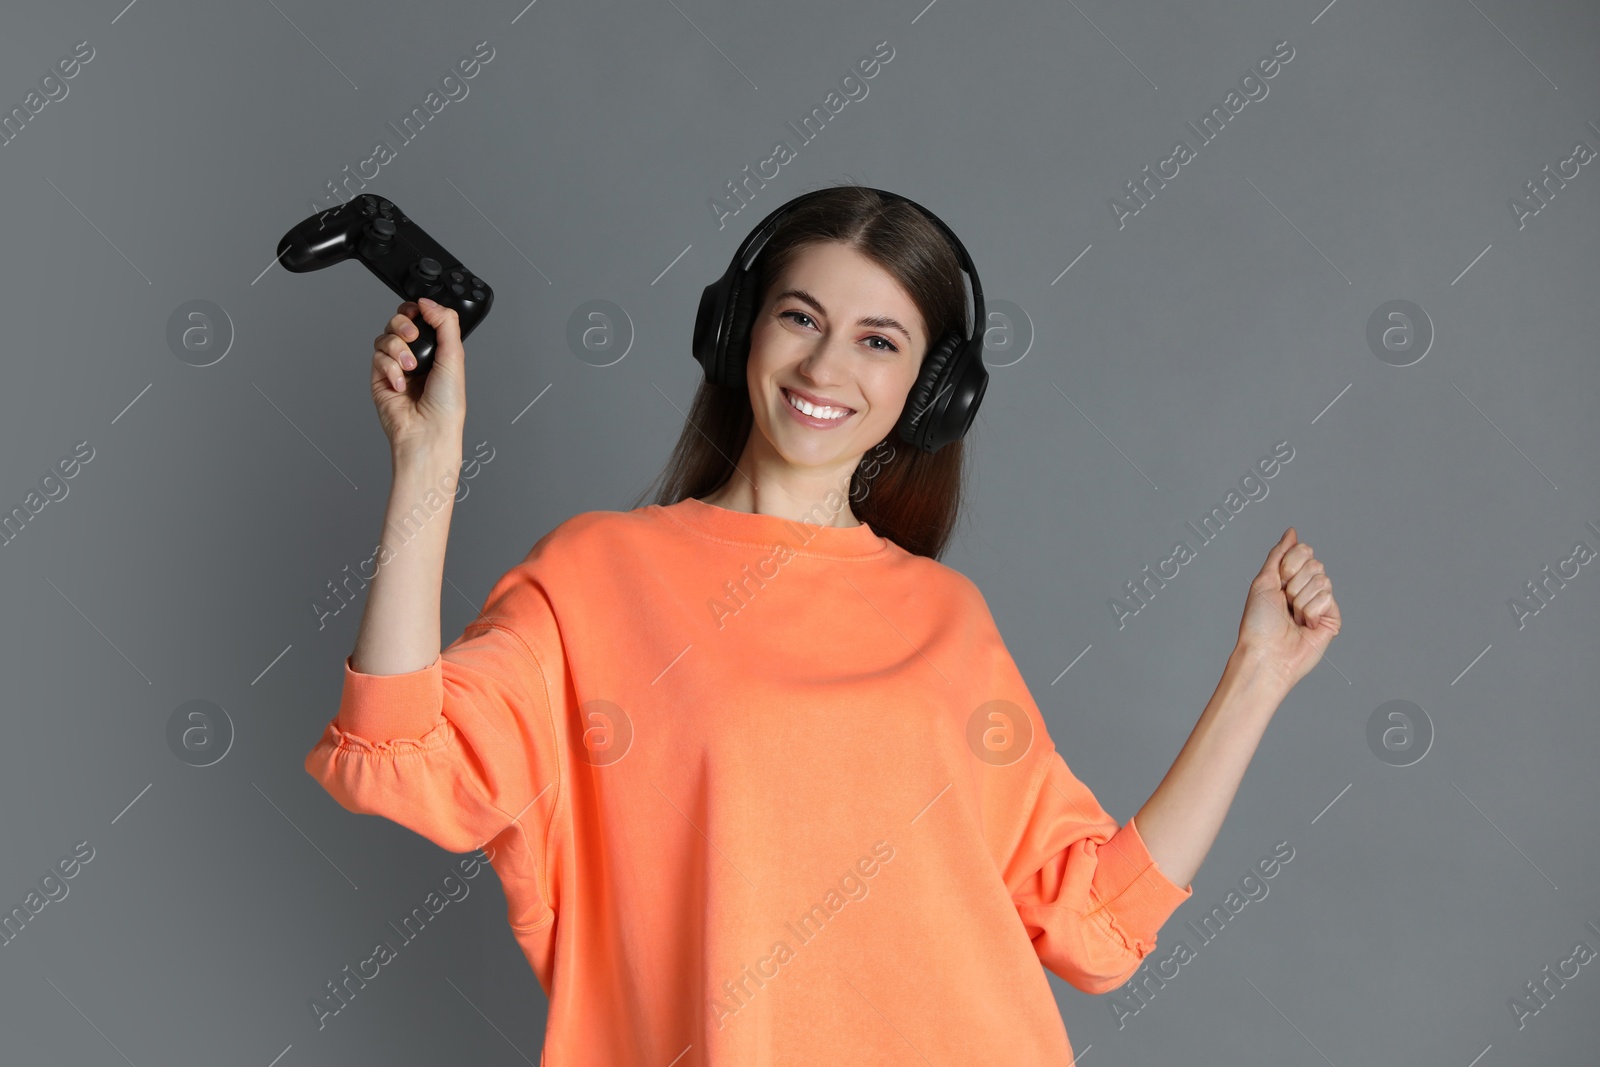 Photo of Happy woman in headphones with controller on gray background